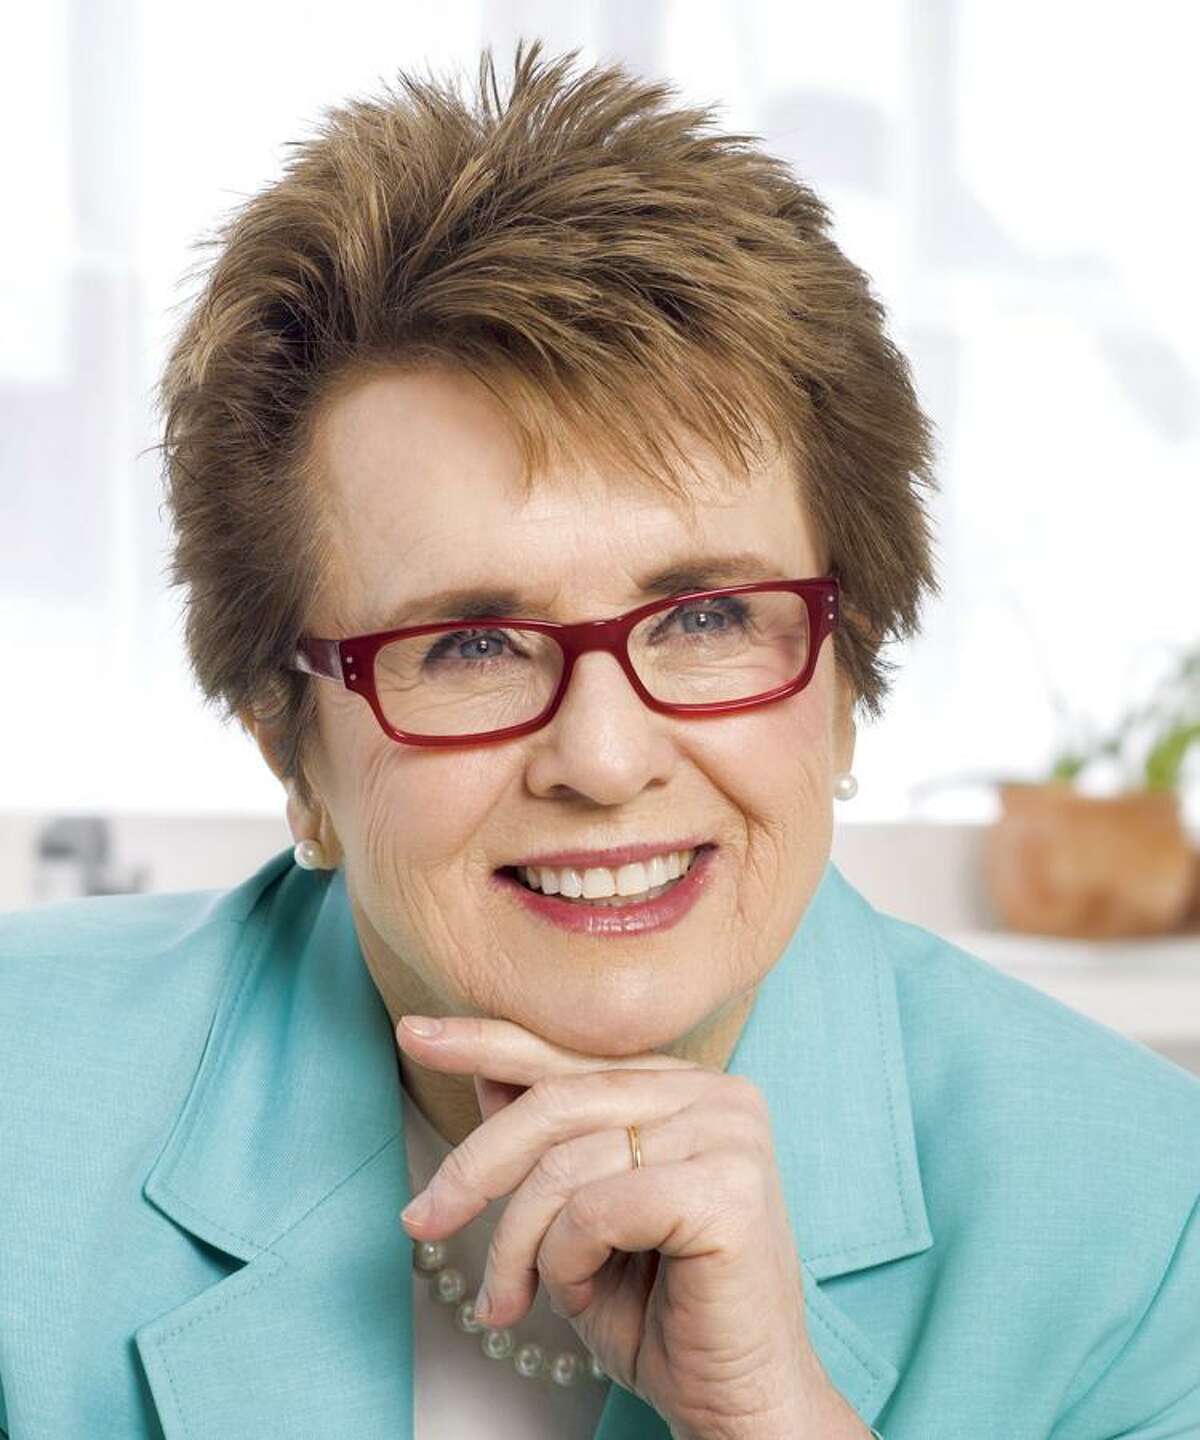 Trailblazer Billie Jean King will be featured as keynote speaker at Fairfield County’s Community Foundation’s Fund for Women & Girls Annual Luncheon on April 5, 2018, at the Hyatt Regency in Greenwich, Conn. The Fund for Women & Girls is celebrating 20 years of impact.